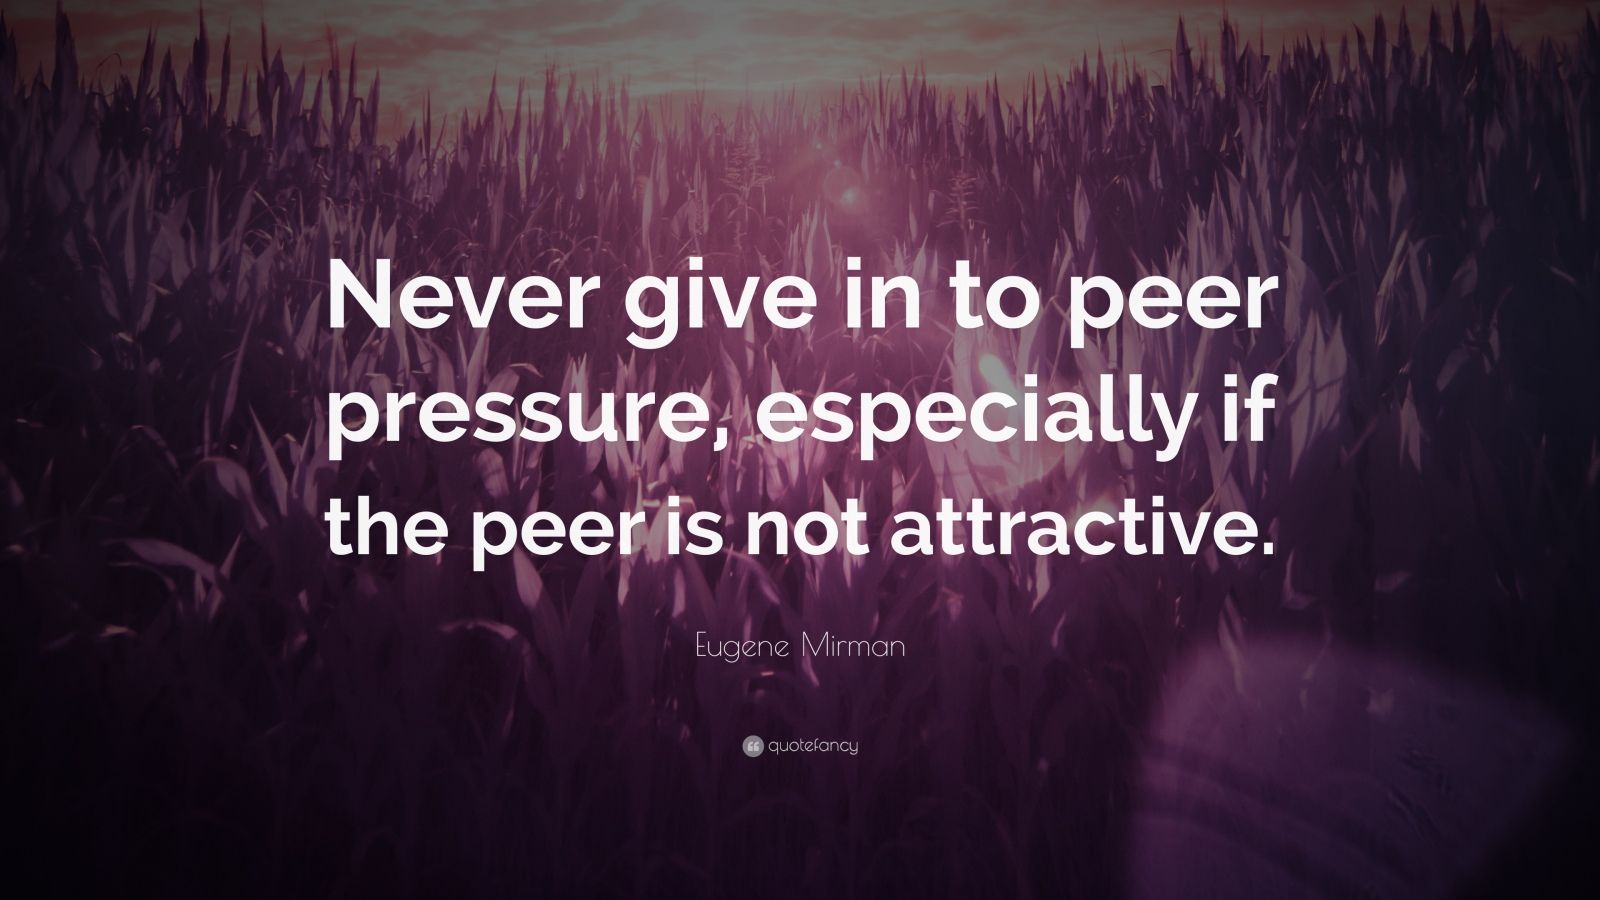 Eugene Mirman Quote “never Give In To Peer Pressure Especially If The Peer Is Not Attractive” 4437